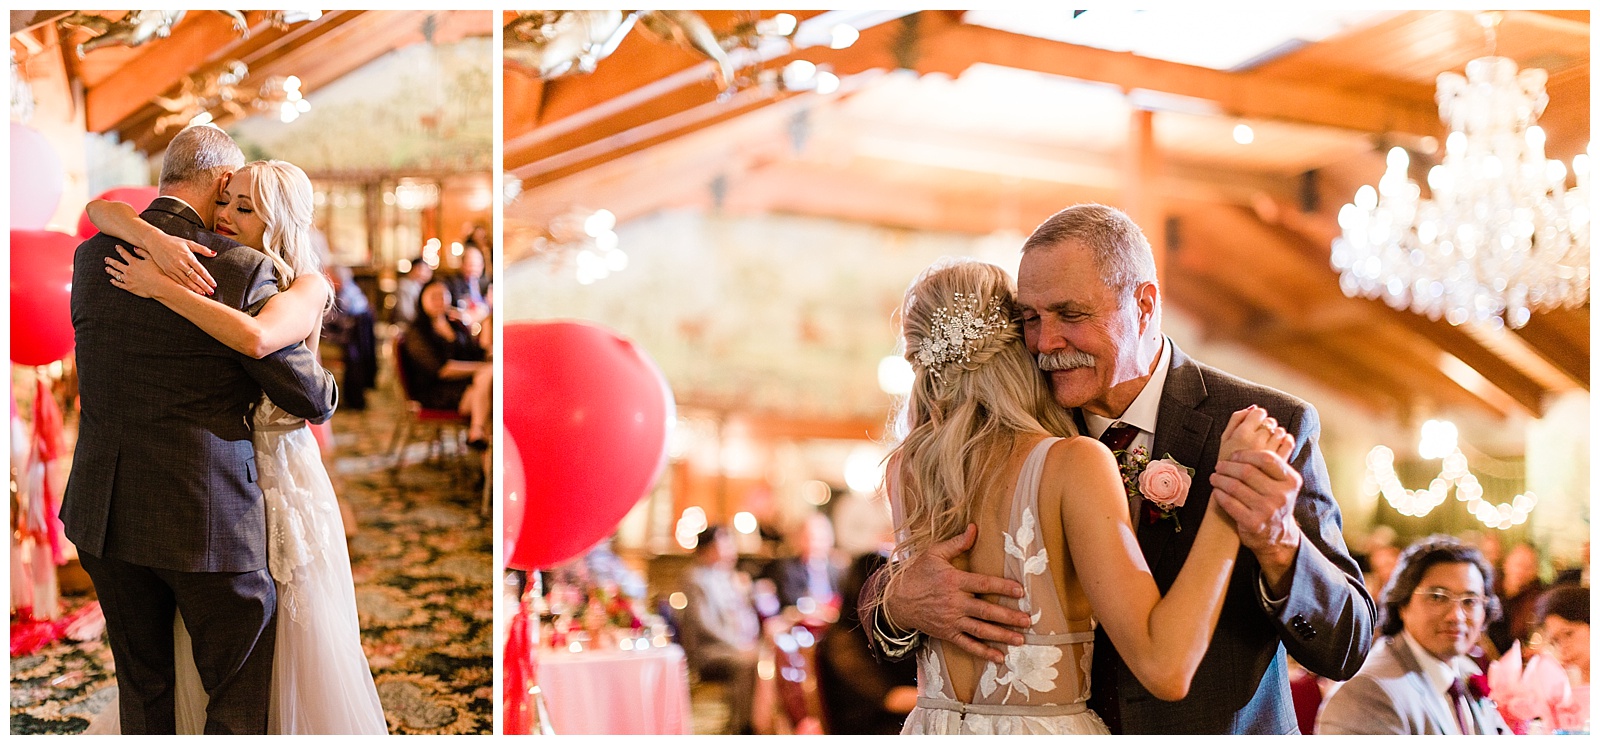 bride dancing with her father at her wedding